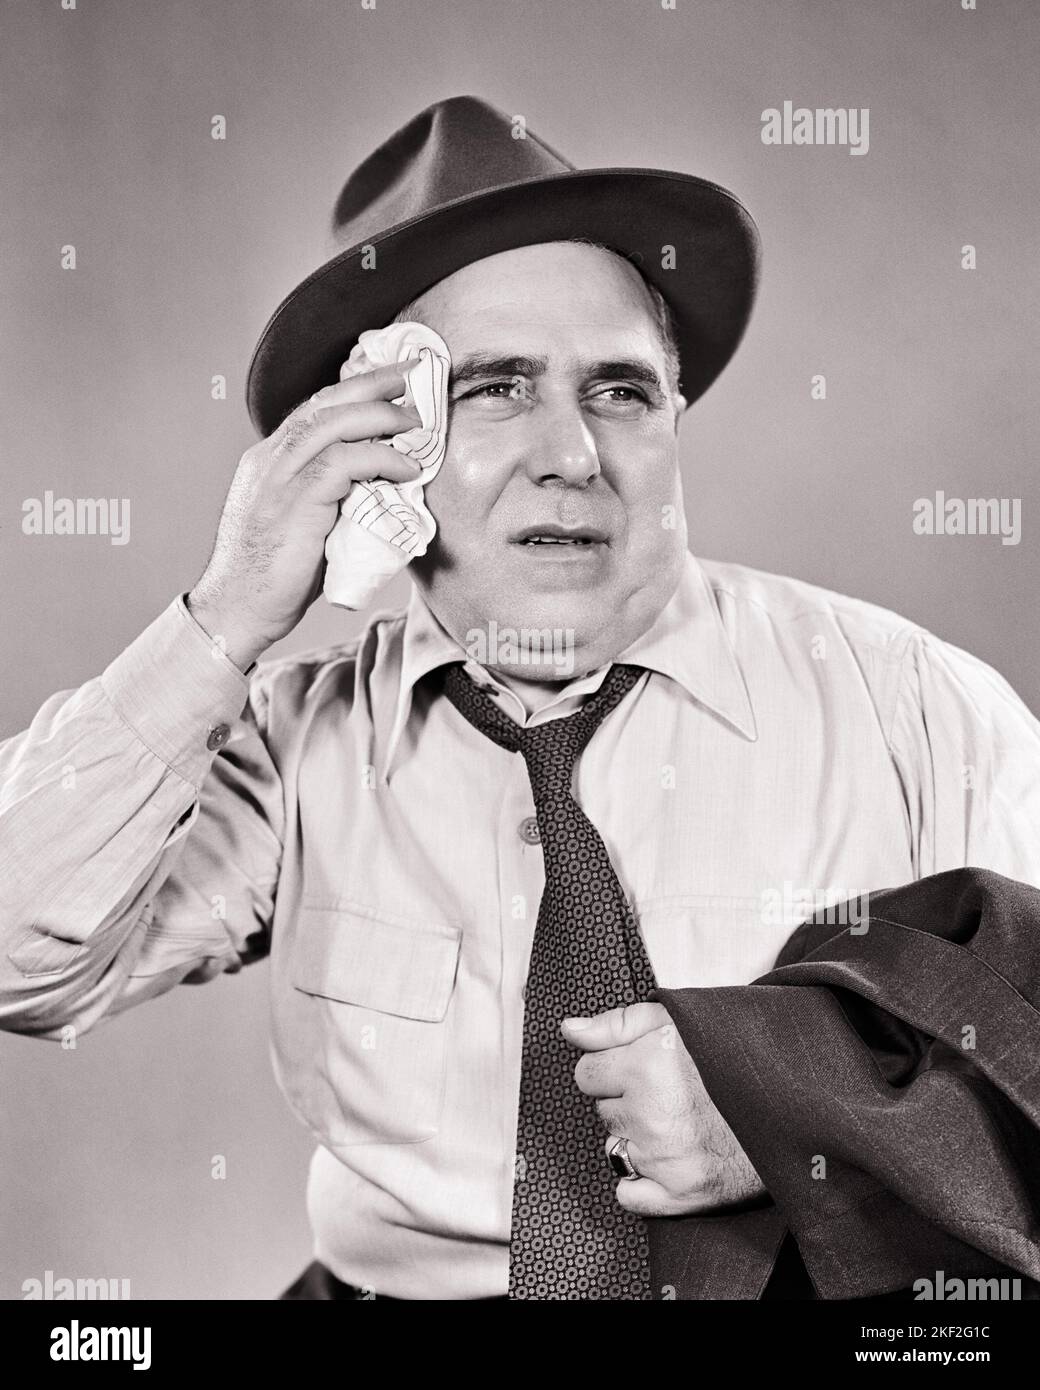 1940s 1950s UNHAPPY BUSINESSMAN WEARING HAT CARRYING SUIT JACKET OVER ARM WIPING SWEAT FROM HIS BROW ON HOT SUMMER DAY COMMUTER - s11139 HAR001 HARS OLD FASHION 1 FACIAL FEAR SAFETY WORRY TIRED LIFESTYLE EXHAUSTED STUDIO SHOT MOODY HEAT ILLNESS HOME LIFE COPY SPACE HALF-LENGTH PERSONS DANGER MALES RISK SWEAT EXPRESSIONS TROUBLED HAZARD SWEATING MIDDLE-AGED B&W CONCERNED SADNESS MIDDLE-AGED MAN SUMMERTIME COMMUTE WIPING DANGEROUS HIS EXCITEMENT EXHAUSTION RISKY HAZARDOUS MOOD UNHEALTHY PERIL UNSAFE CONCEPTUAL GLUM UNCOMFORTABLE JEOPARDY WILTED BROW FATIGUE MISERABLE PERSPIRATION SEASON Stock Photo